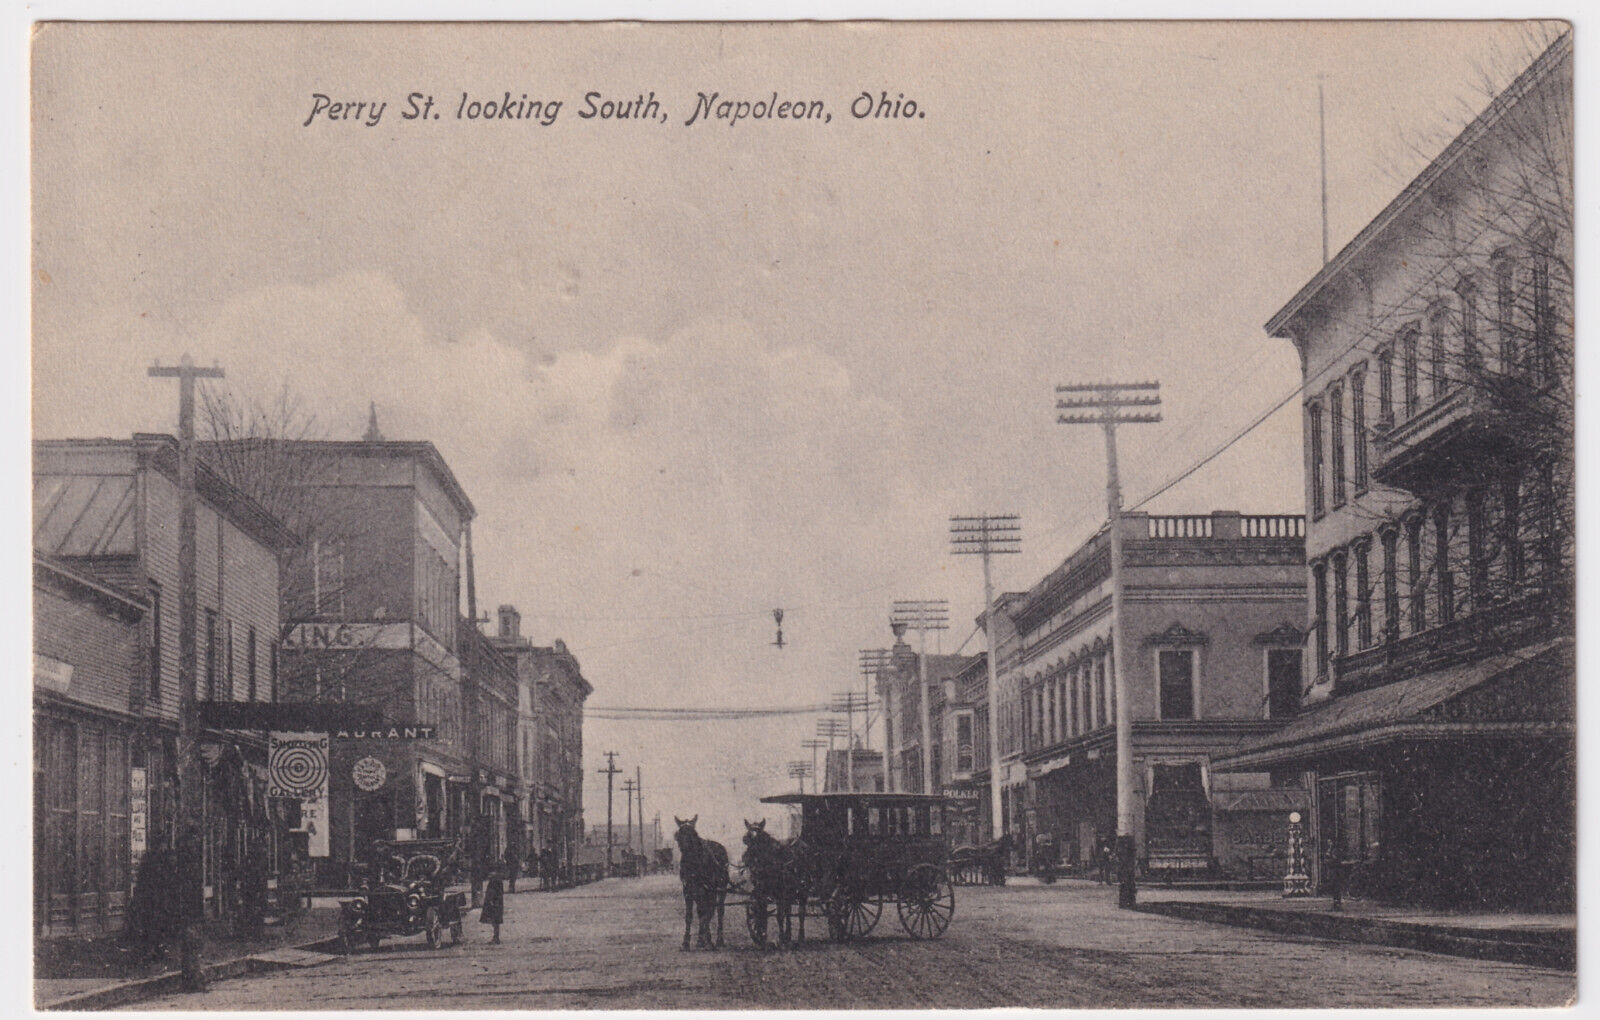 OHIO NAPOLEON PERRY ST VIEW SOUTH POSTED 1910 TO MORRIS PASS, MECHANICSBURG PA